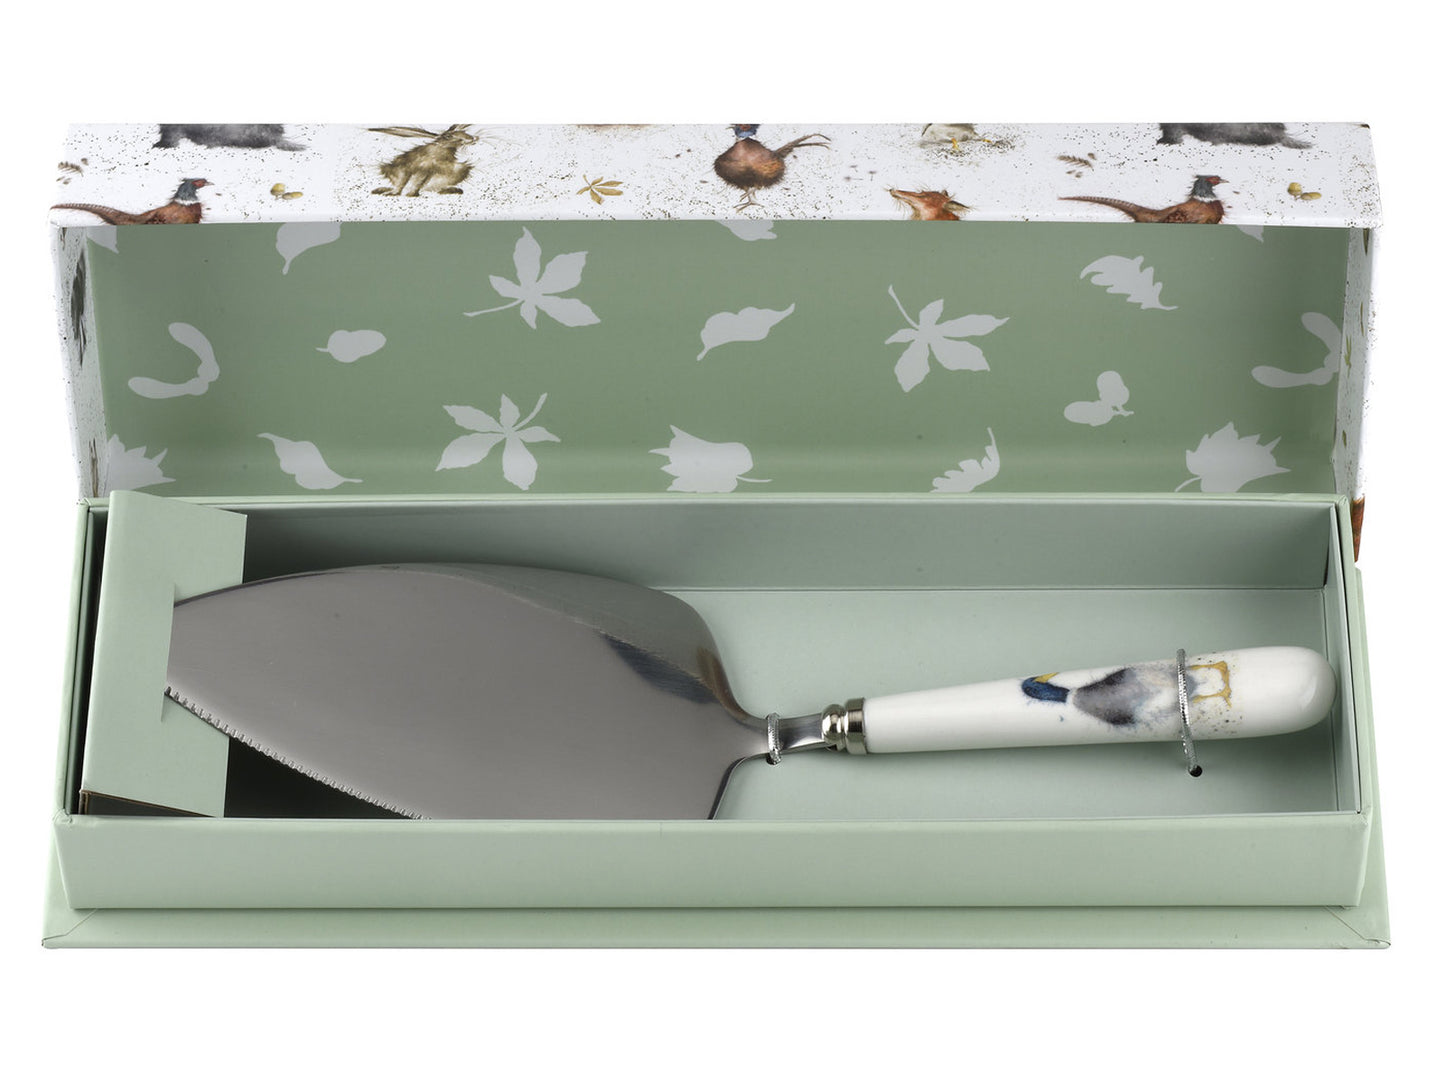 A silver cake slice with a white porcelain handle with a watercolour duck on it, in a light green and white box with animal designs on it